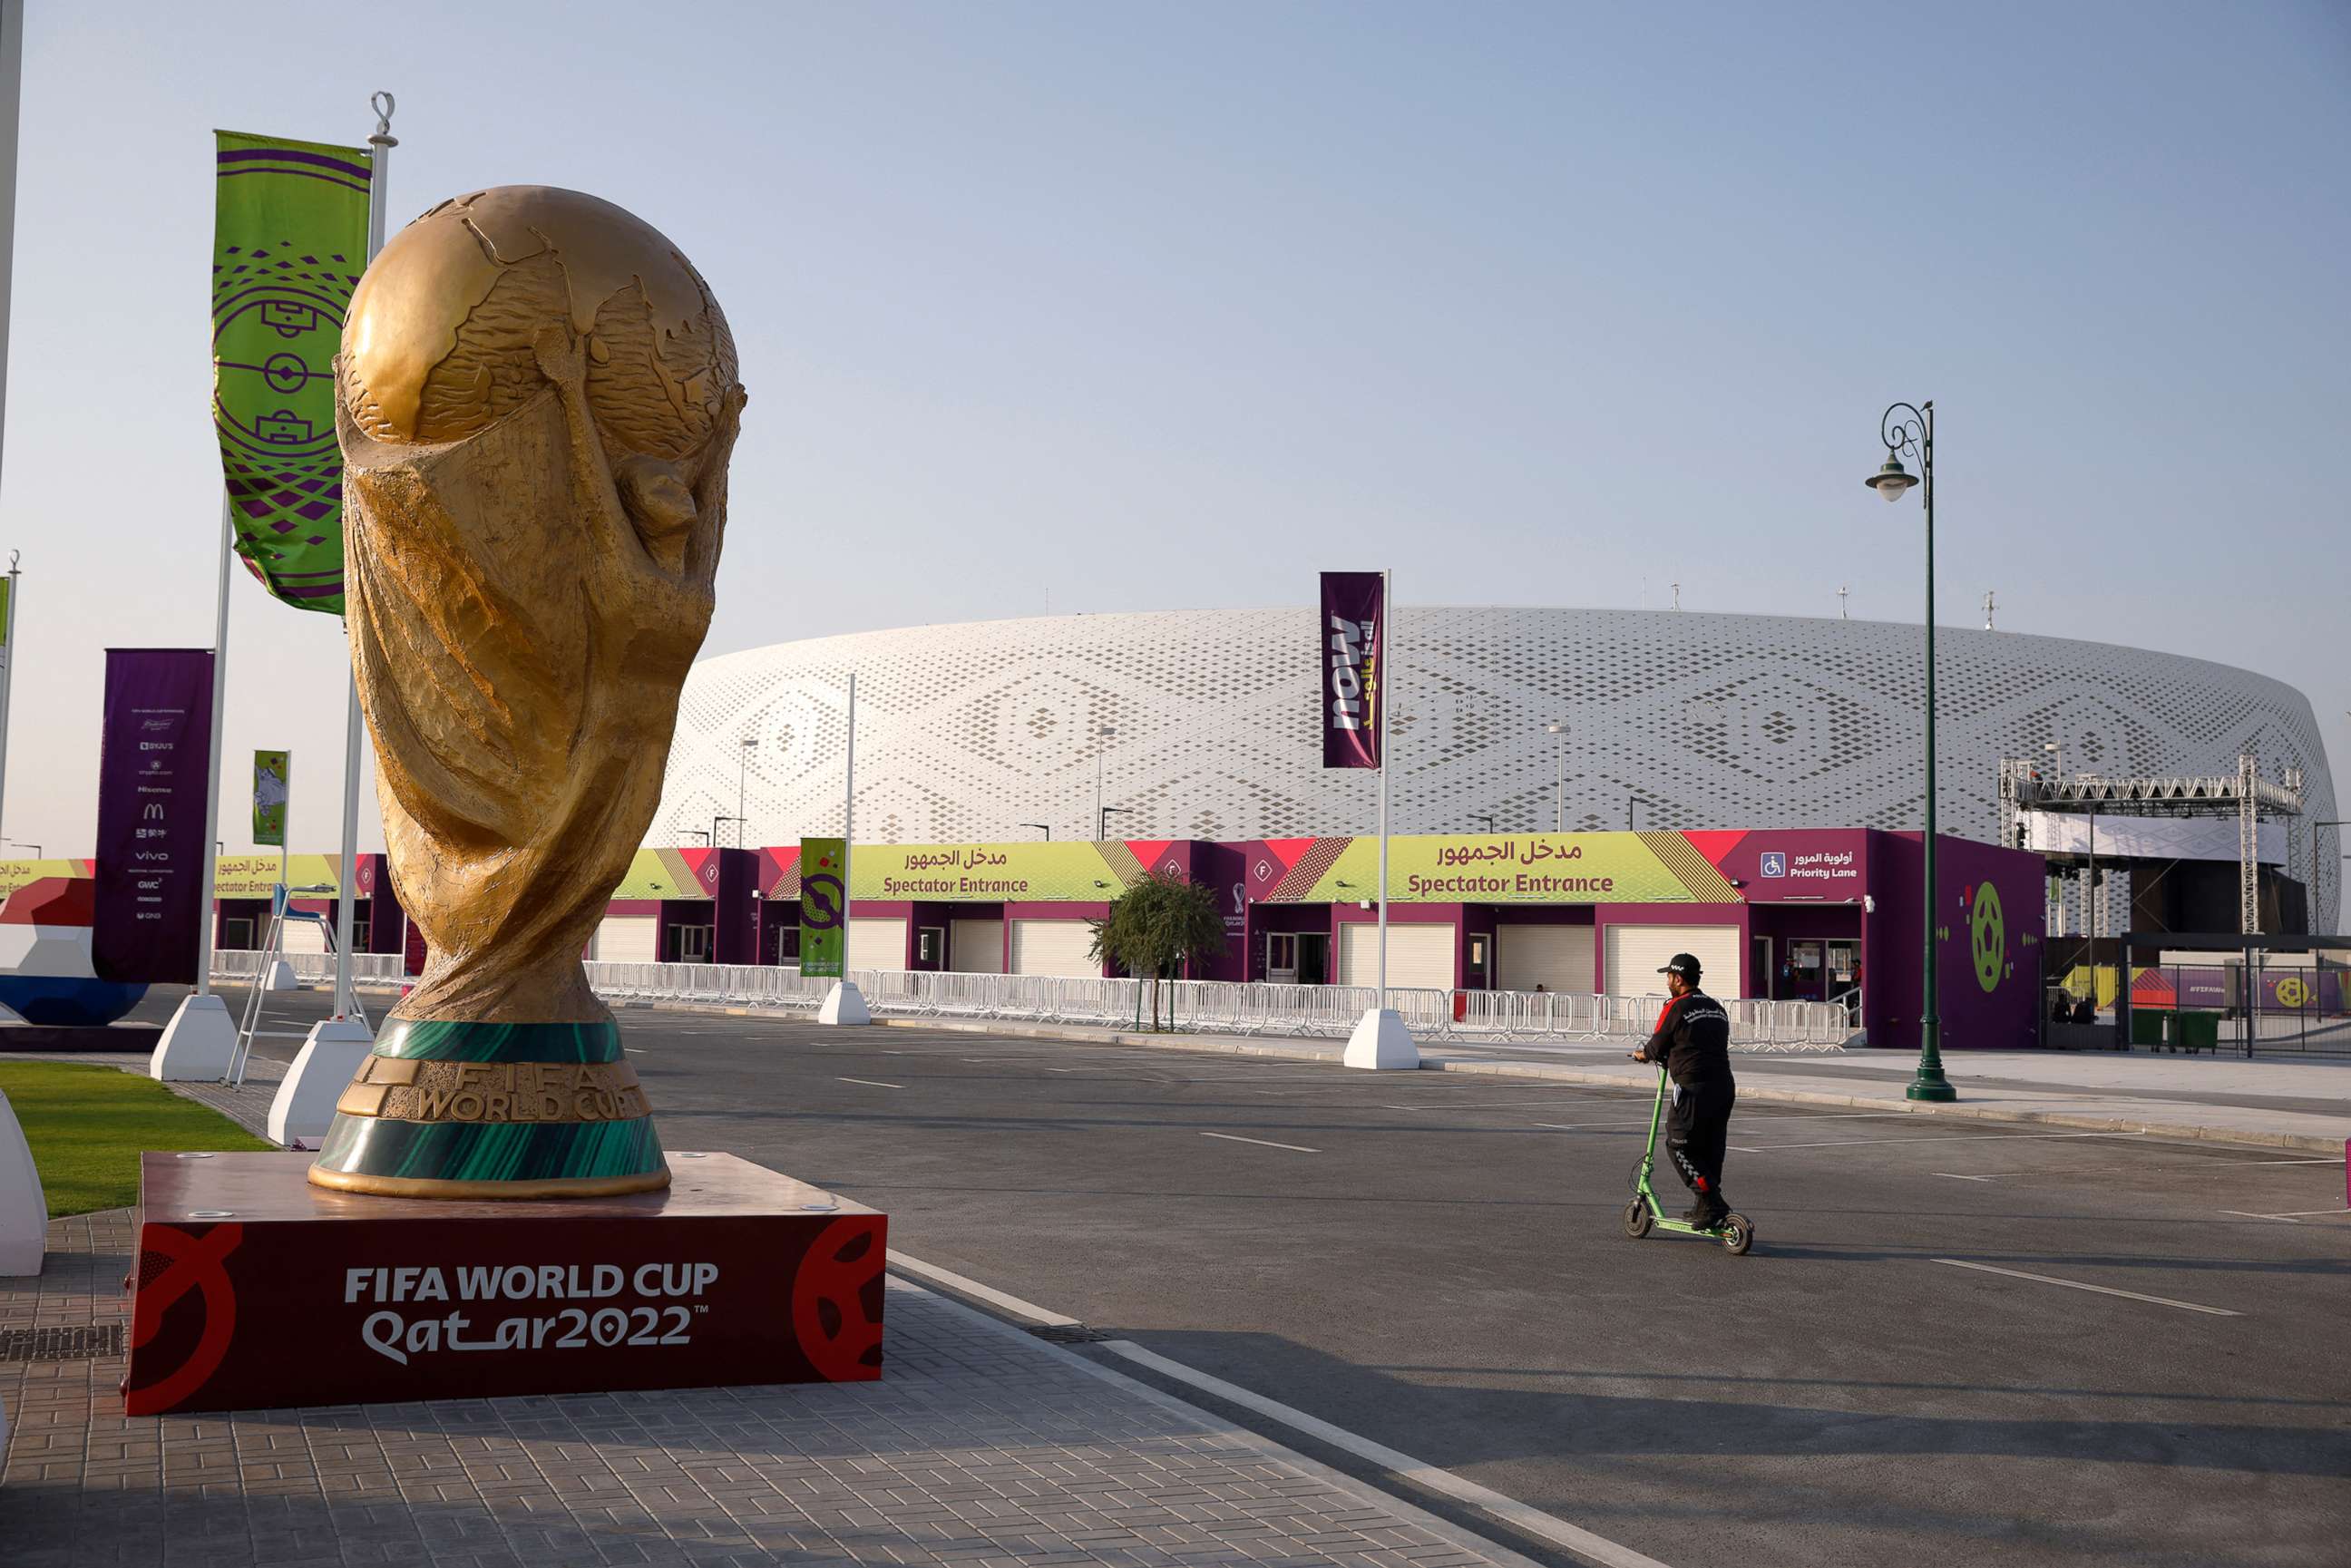 PHOTO: A replica World Cup trophy is shown outside the Al Thumama Stadium in Doha, Qatar, on Nov. 13, ahead of the FIFA World Cup football tournament.